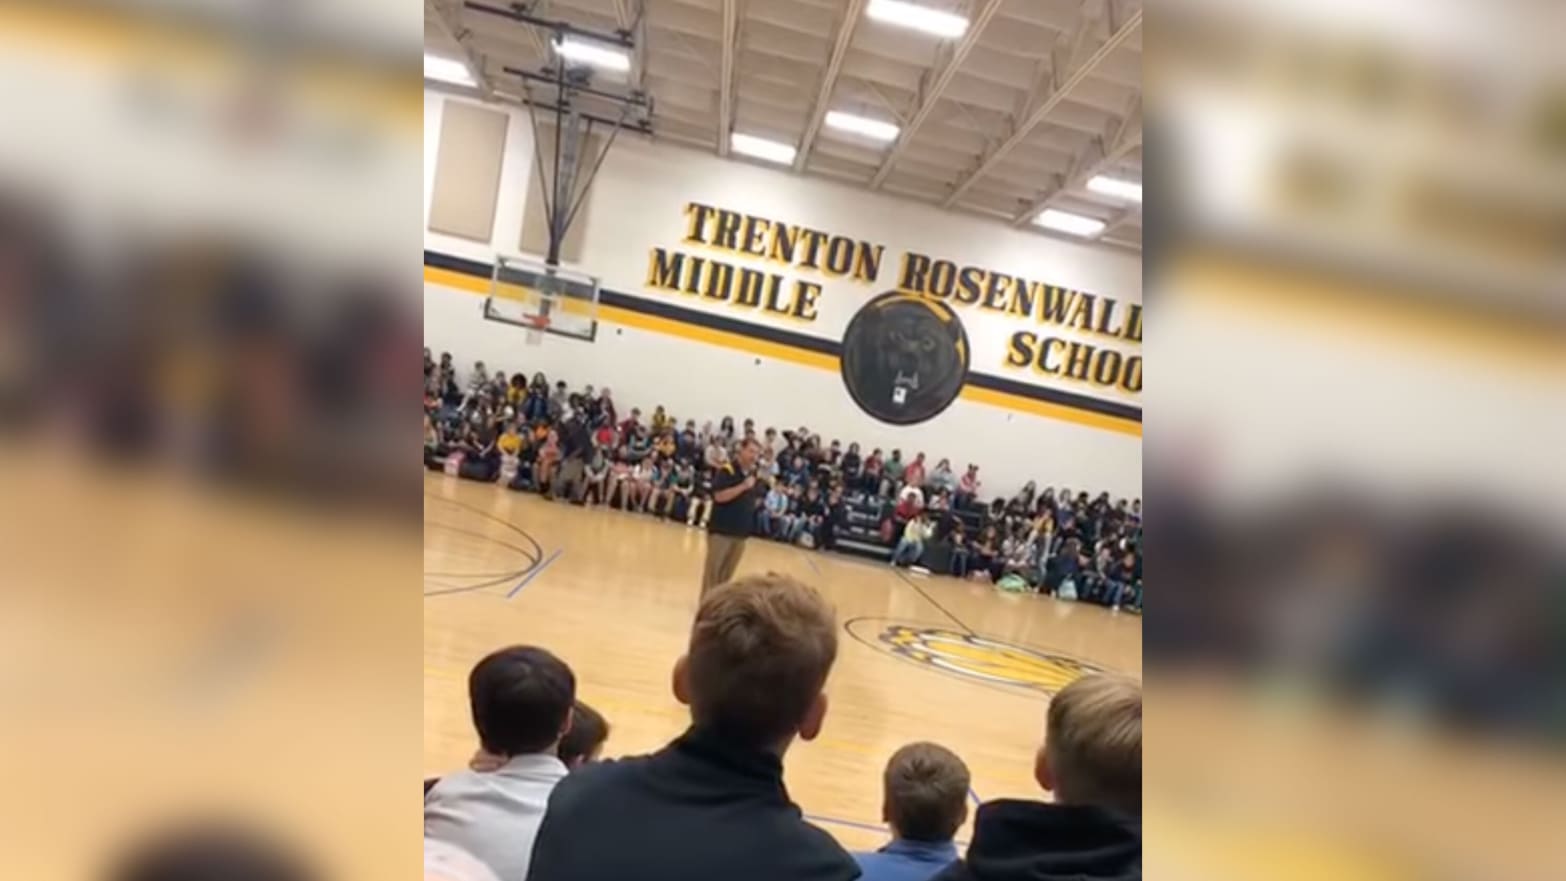 Principal at Tennessee Middle School Drops N-Word While Addressing Students About ‘Behavioral Expectations’ and ‘Eliminating Use of Derogatory, Racially Charged Terms’